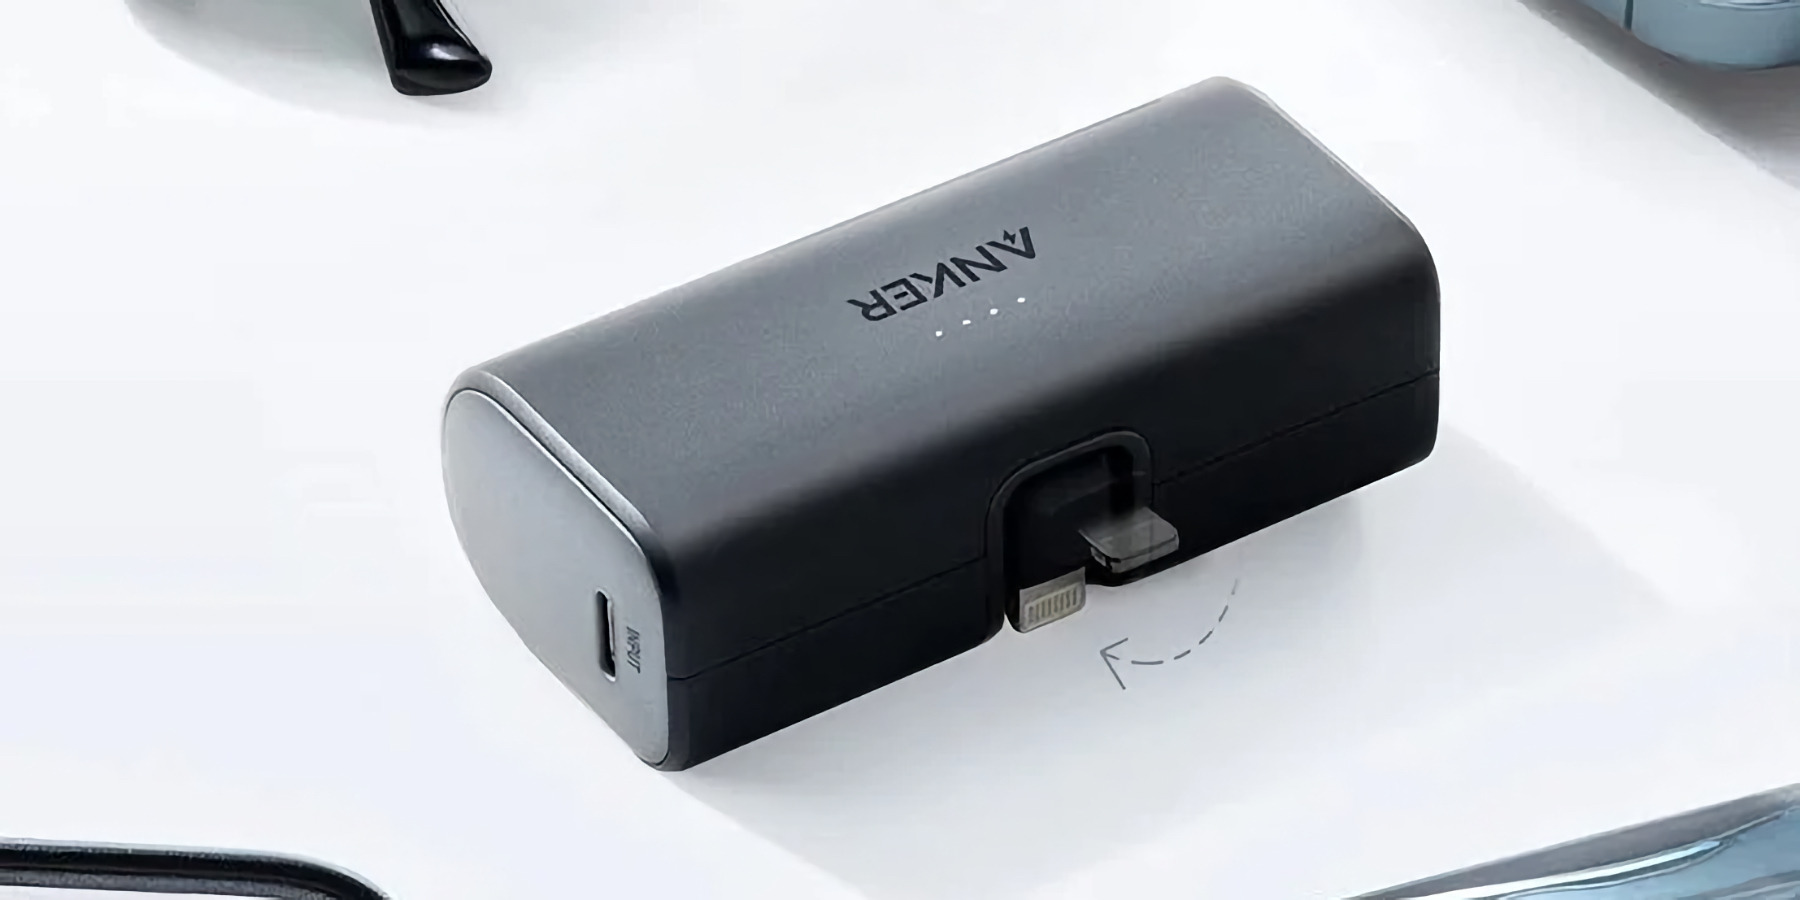 This Tiny Power Bank Connects Directly to Your iPhone and Provides